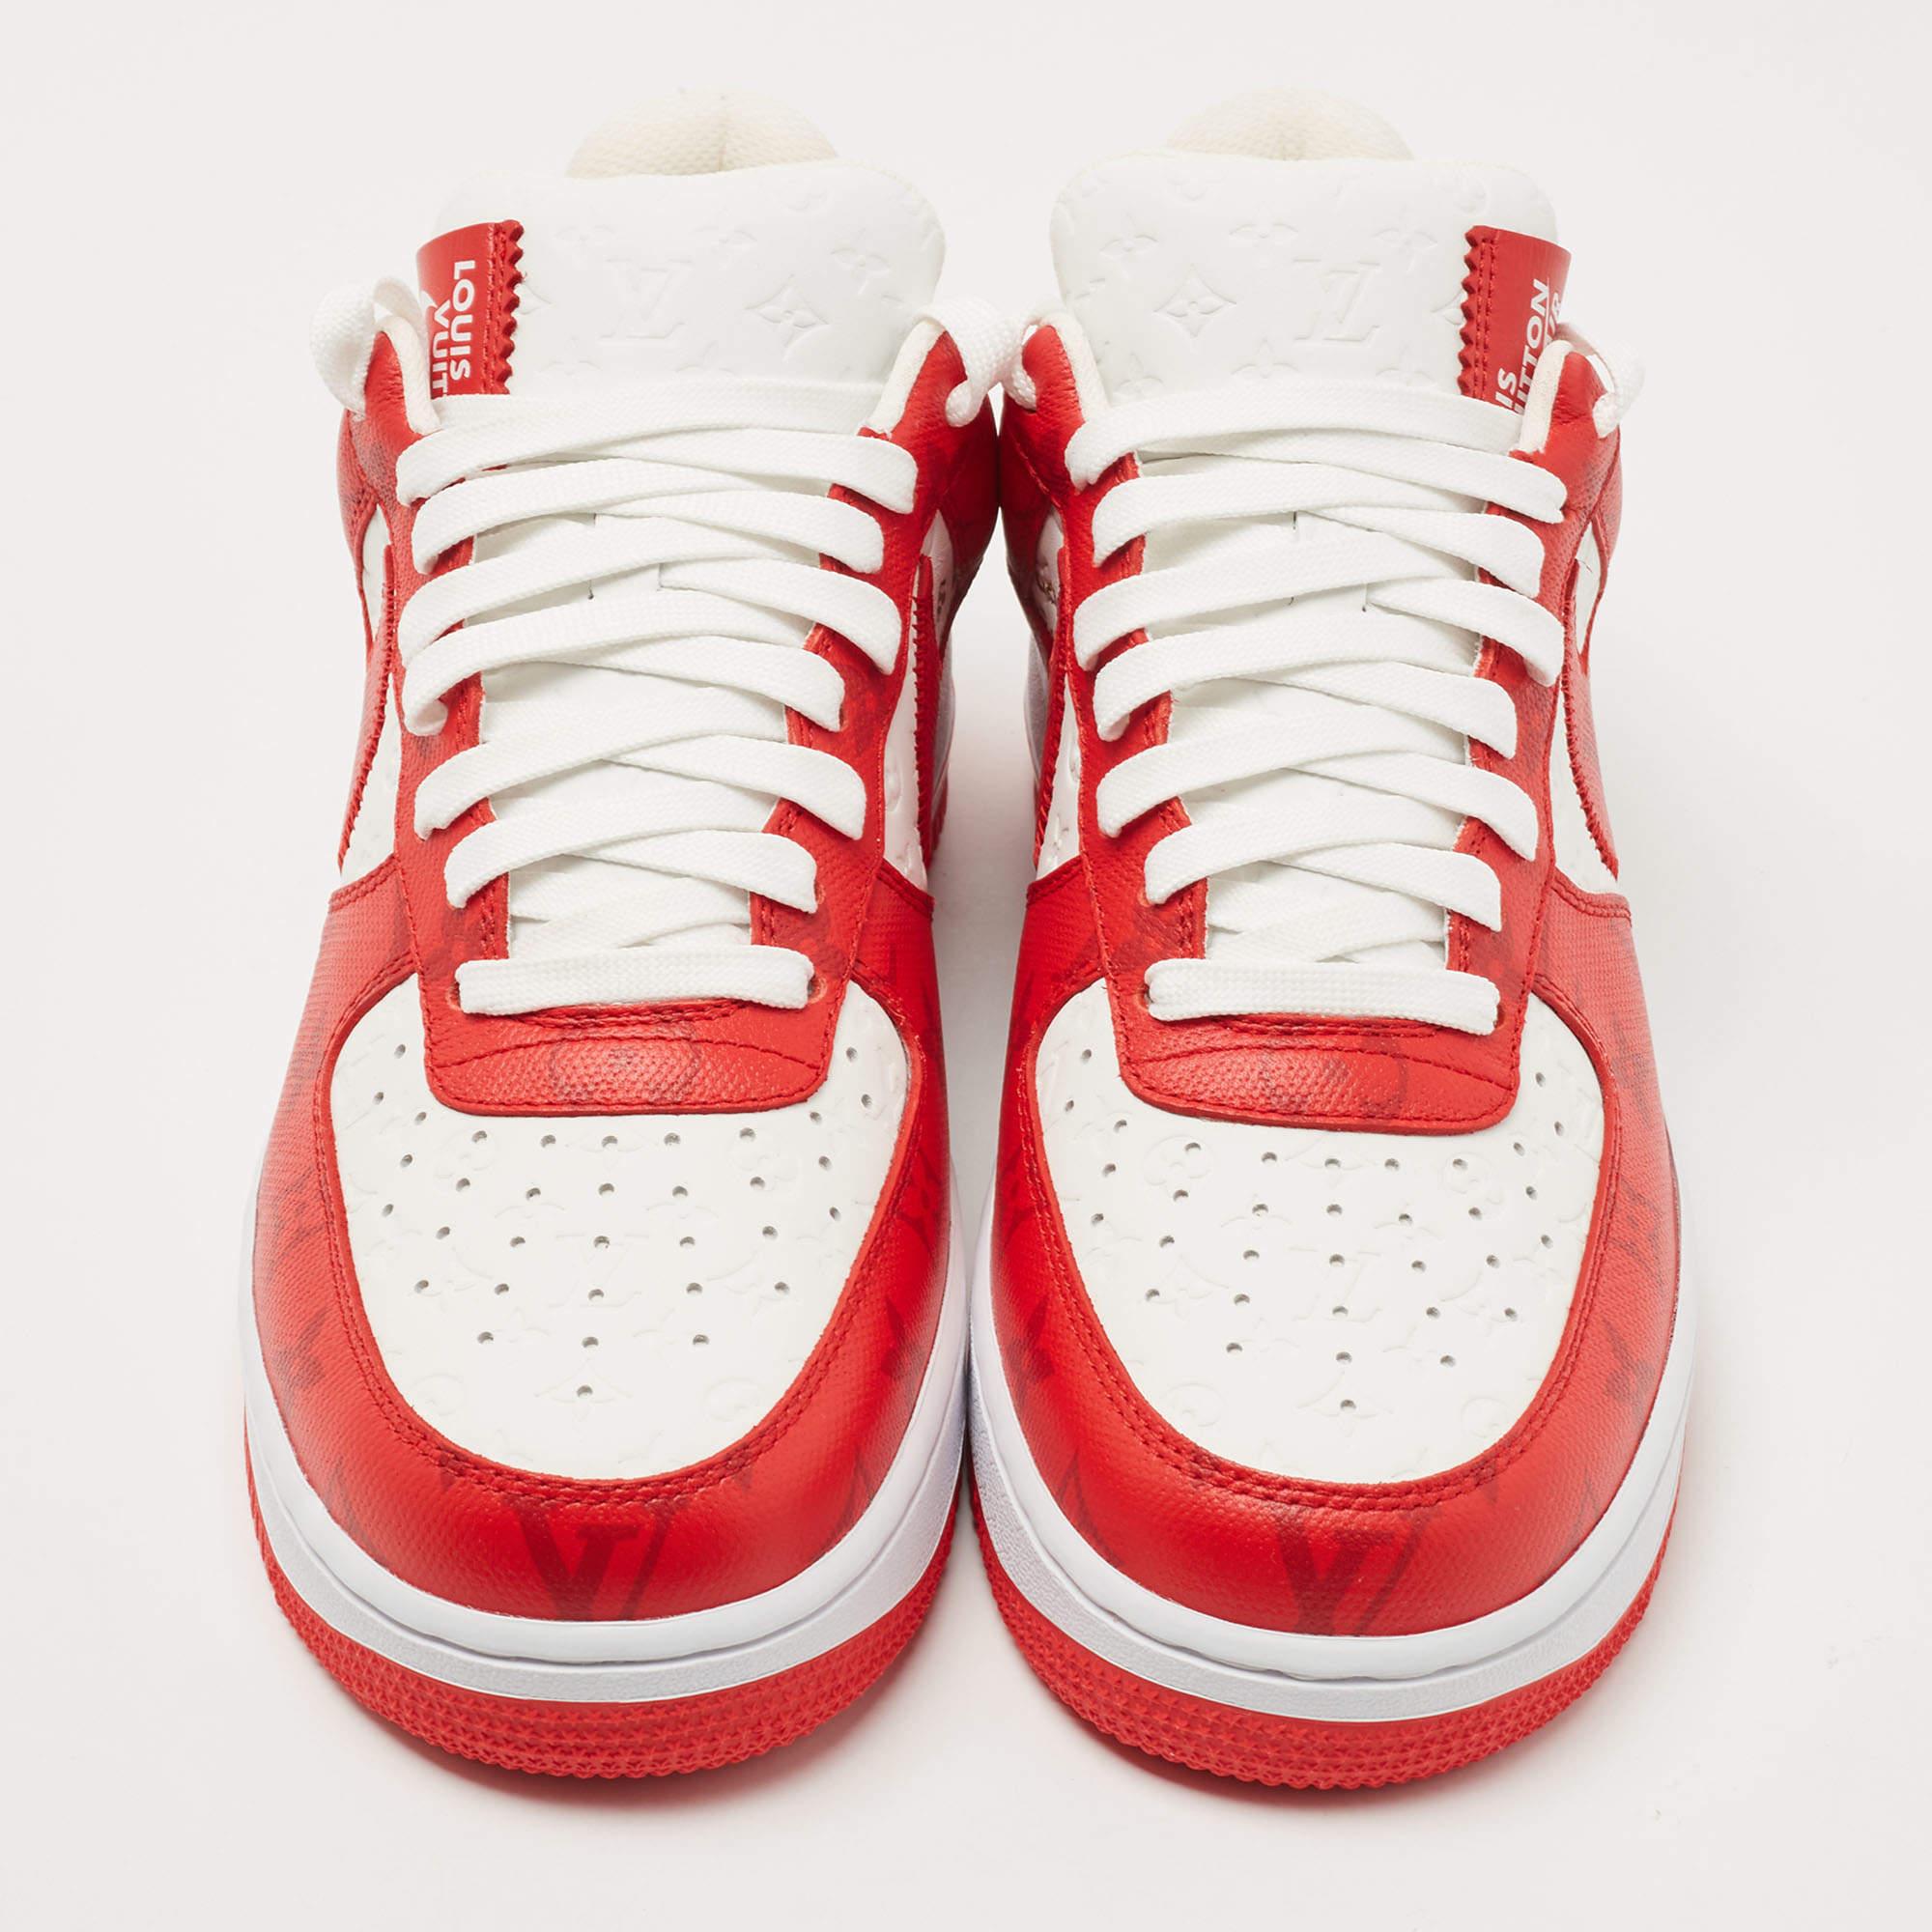 These Nike Air Force 1 sneaker by Louis Vuitton X Nike By Virgil Abloh are super sturdy, stunning, and stylish. They are crafted from red-white Monogram leather into a low-top silhouette. They showcase lace-up fastenings and brand details on the